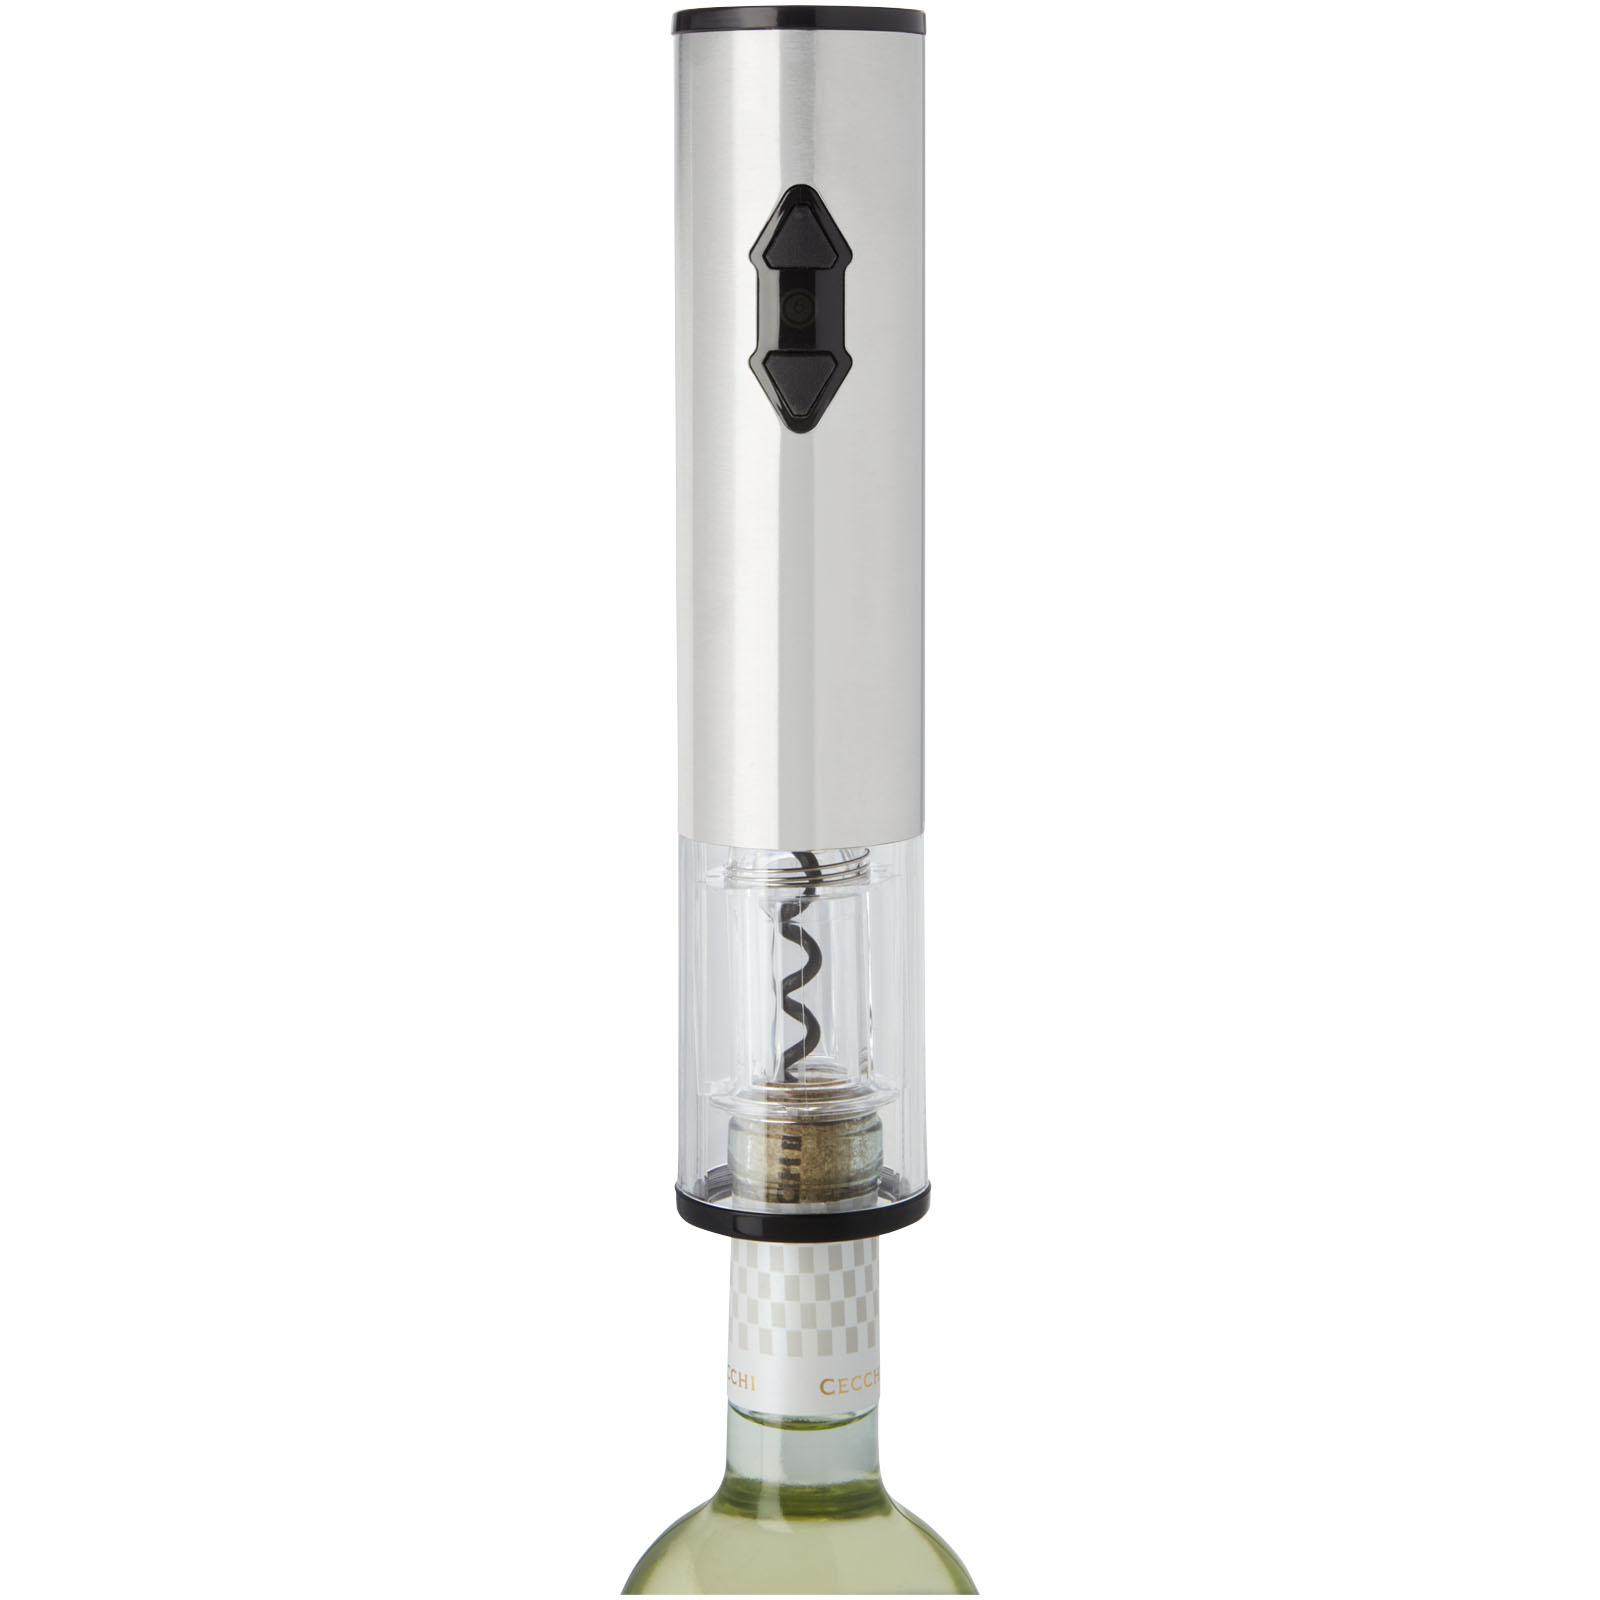 Advertising Wine Accessories - Pino electric wine opener with wine tools - 4